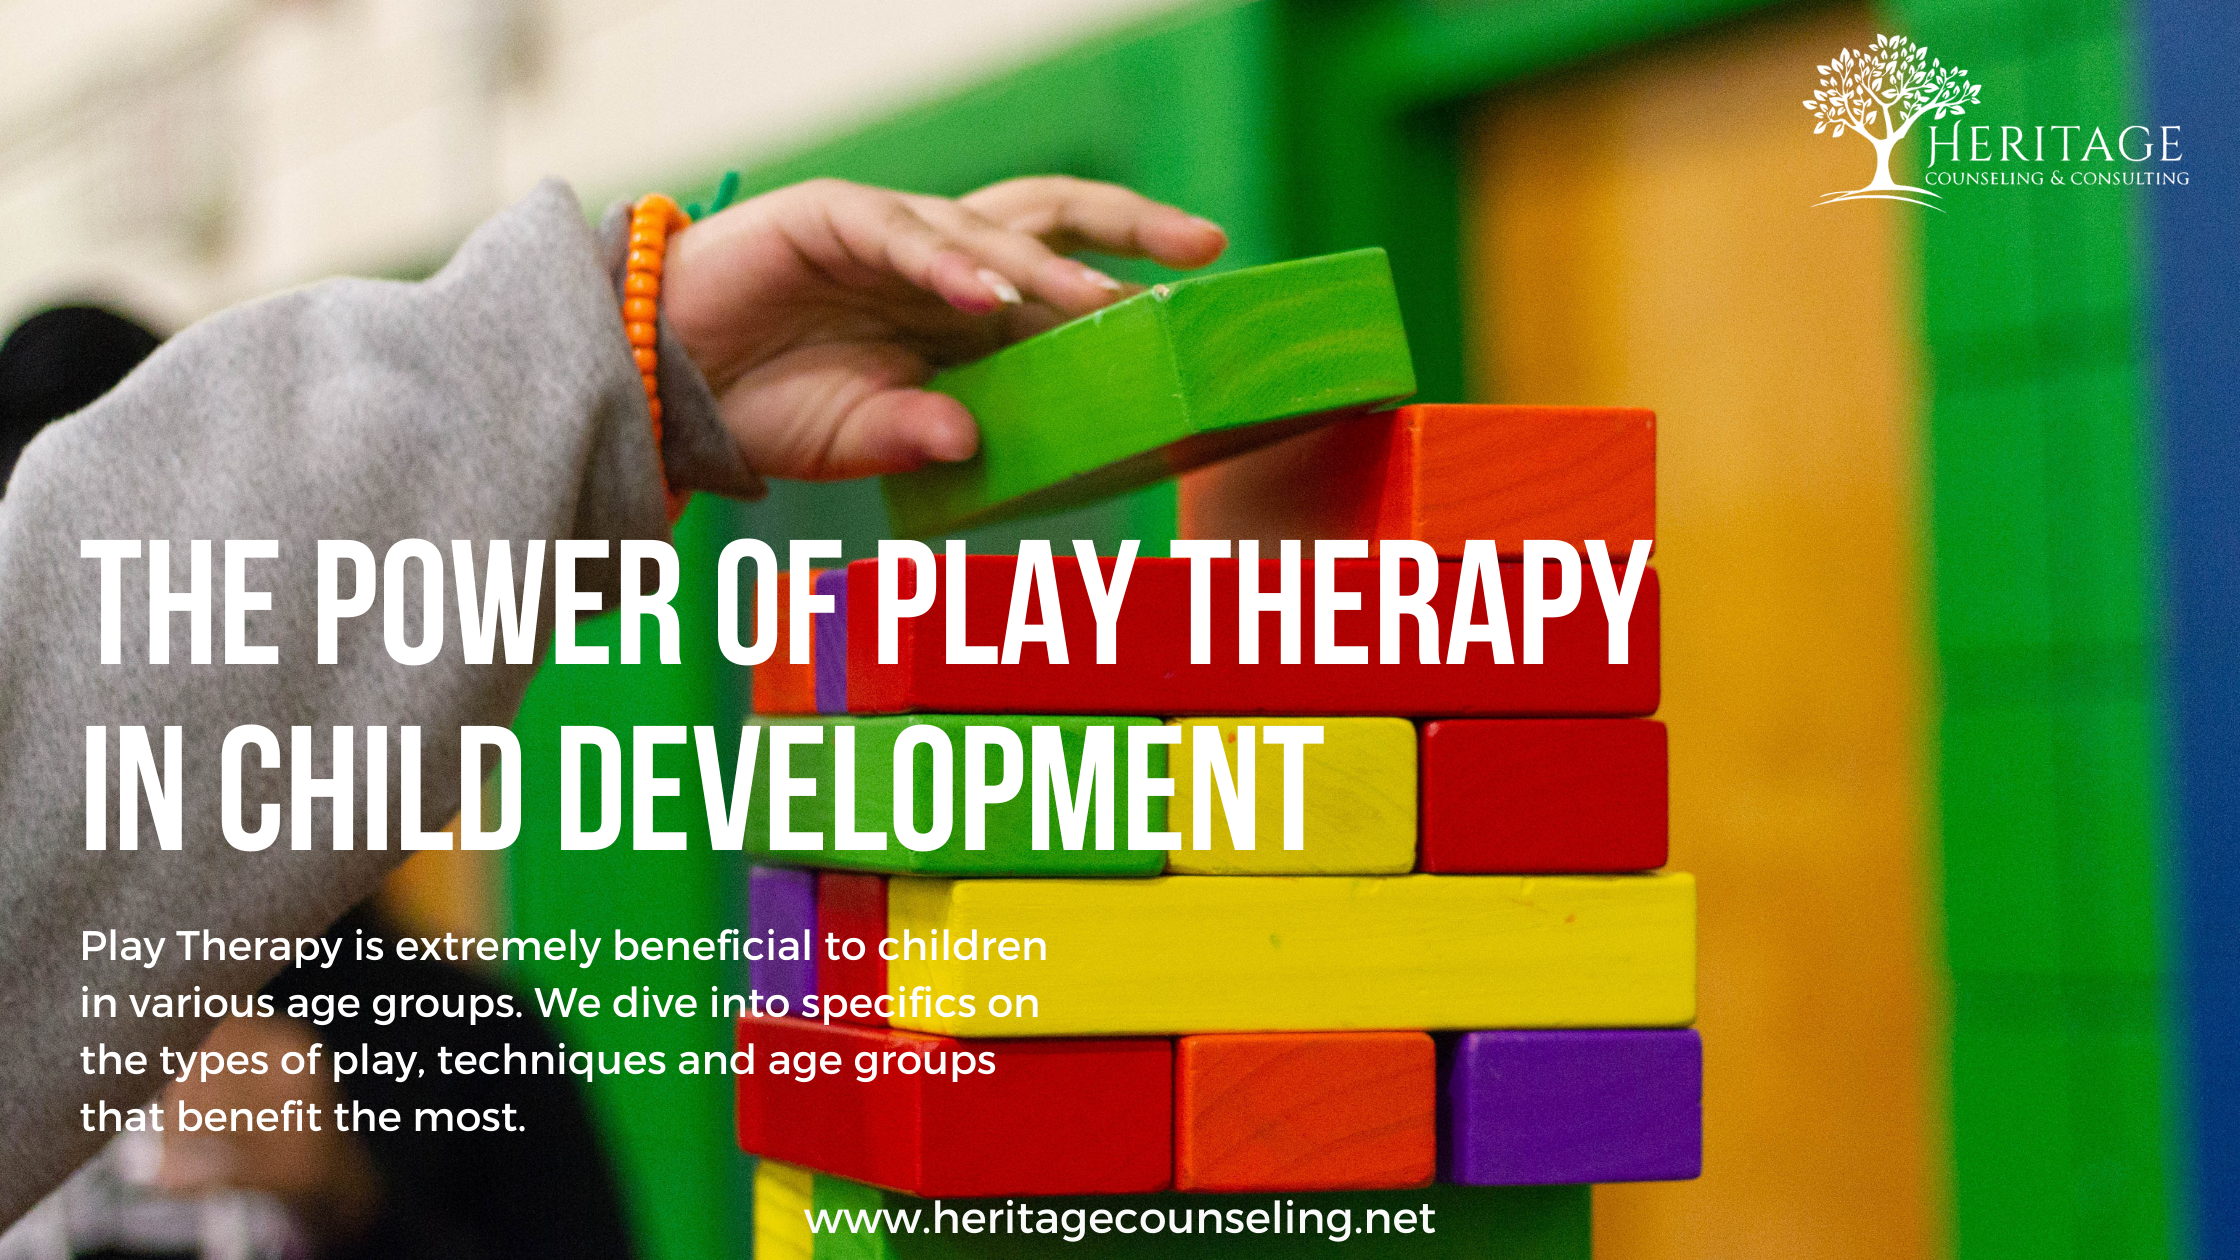 The Power of Play Therapy in Child Development